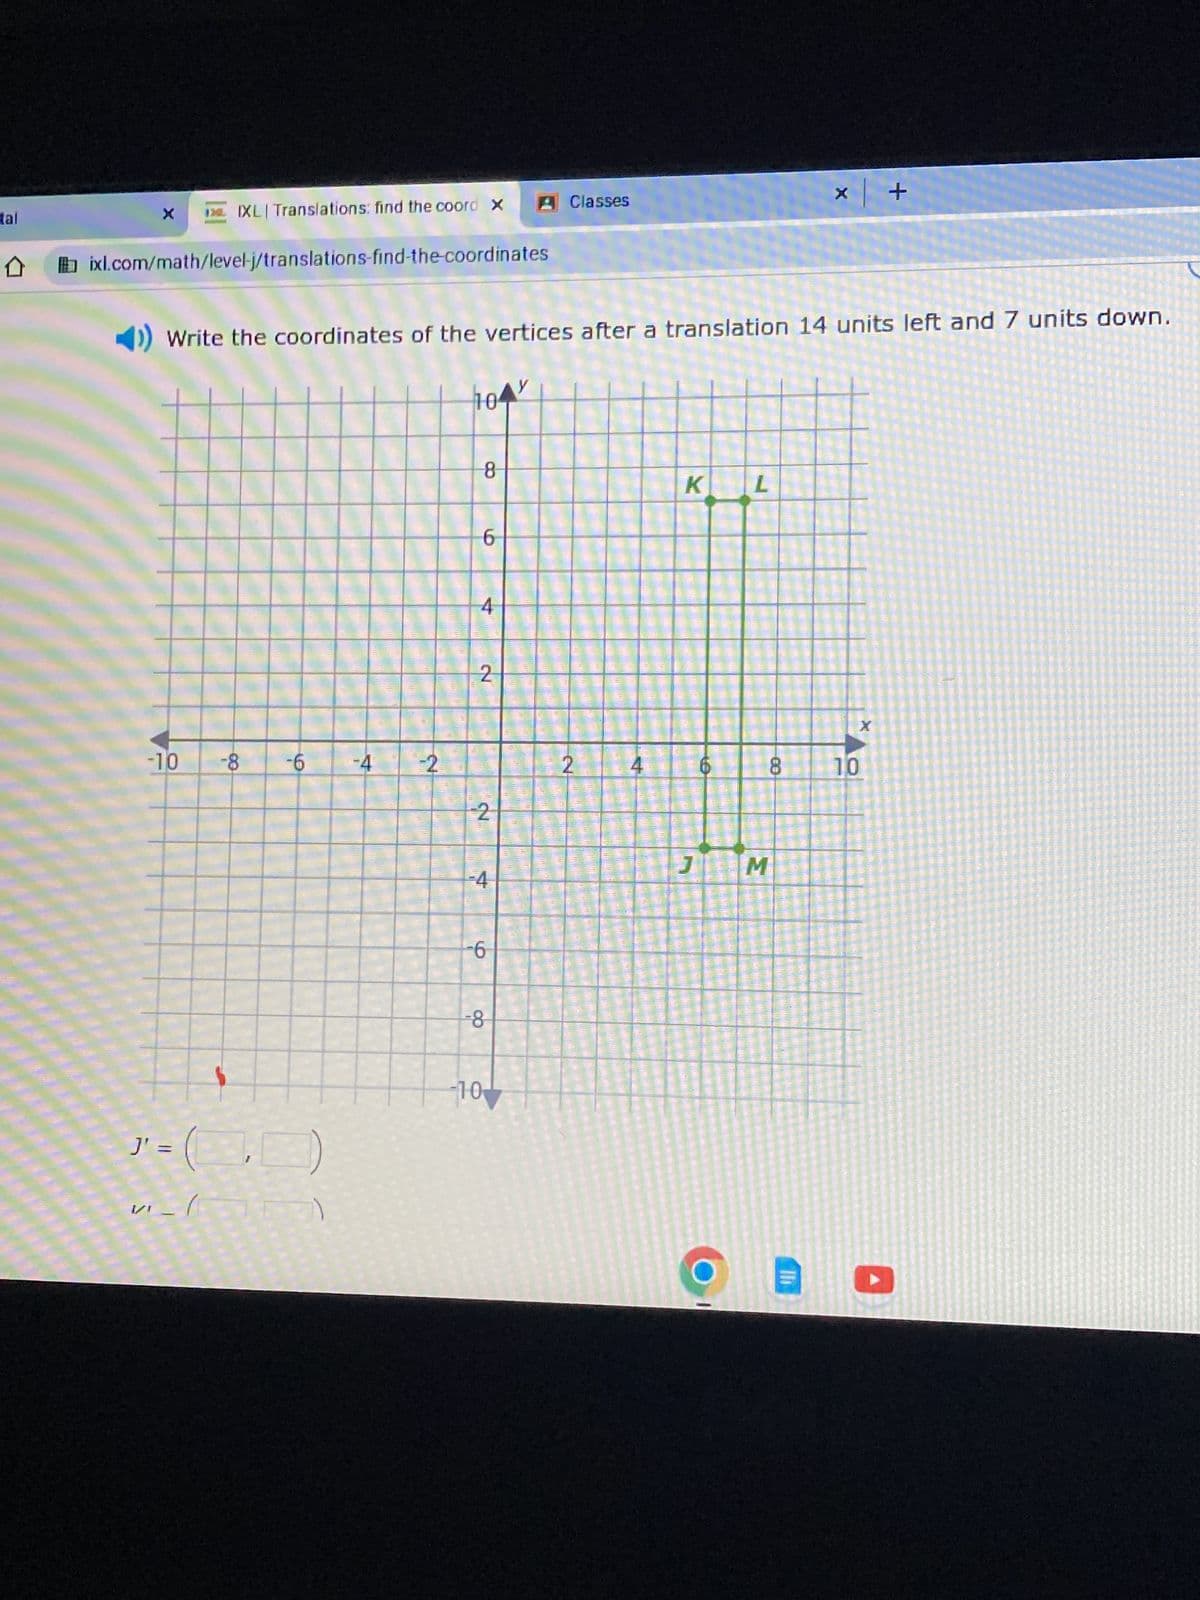 tal
**
X
ixl.com/math/level-j/translations-find-the-coordinates
-10
IXL| Translations: find the coord X A Classes
◄)) Write the coordinates of the vertices after a translation 14 units left and 7 units down.
J'
"=(0)
V-1
-8 -6
-4
-2
104
8
6
4
2
2
-4
-6
-8
-10
CREAM
2
4
K L
LO
1
8
JM
x +
Th
10